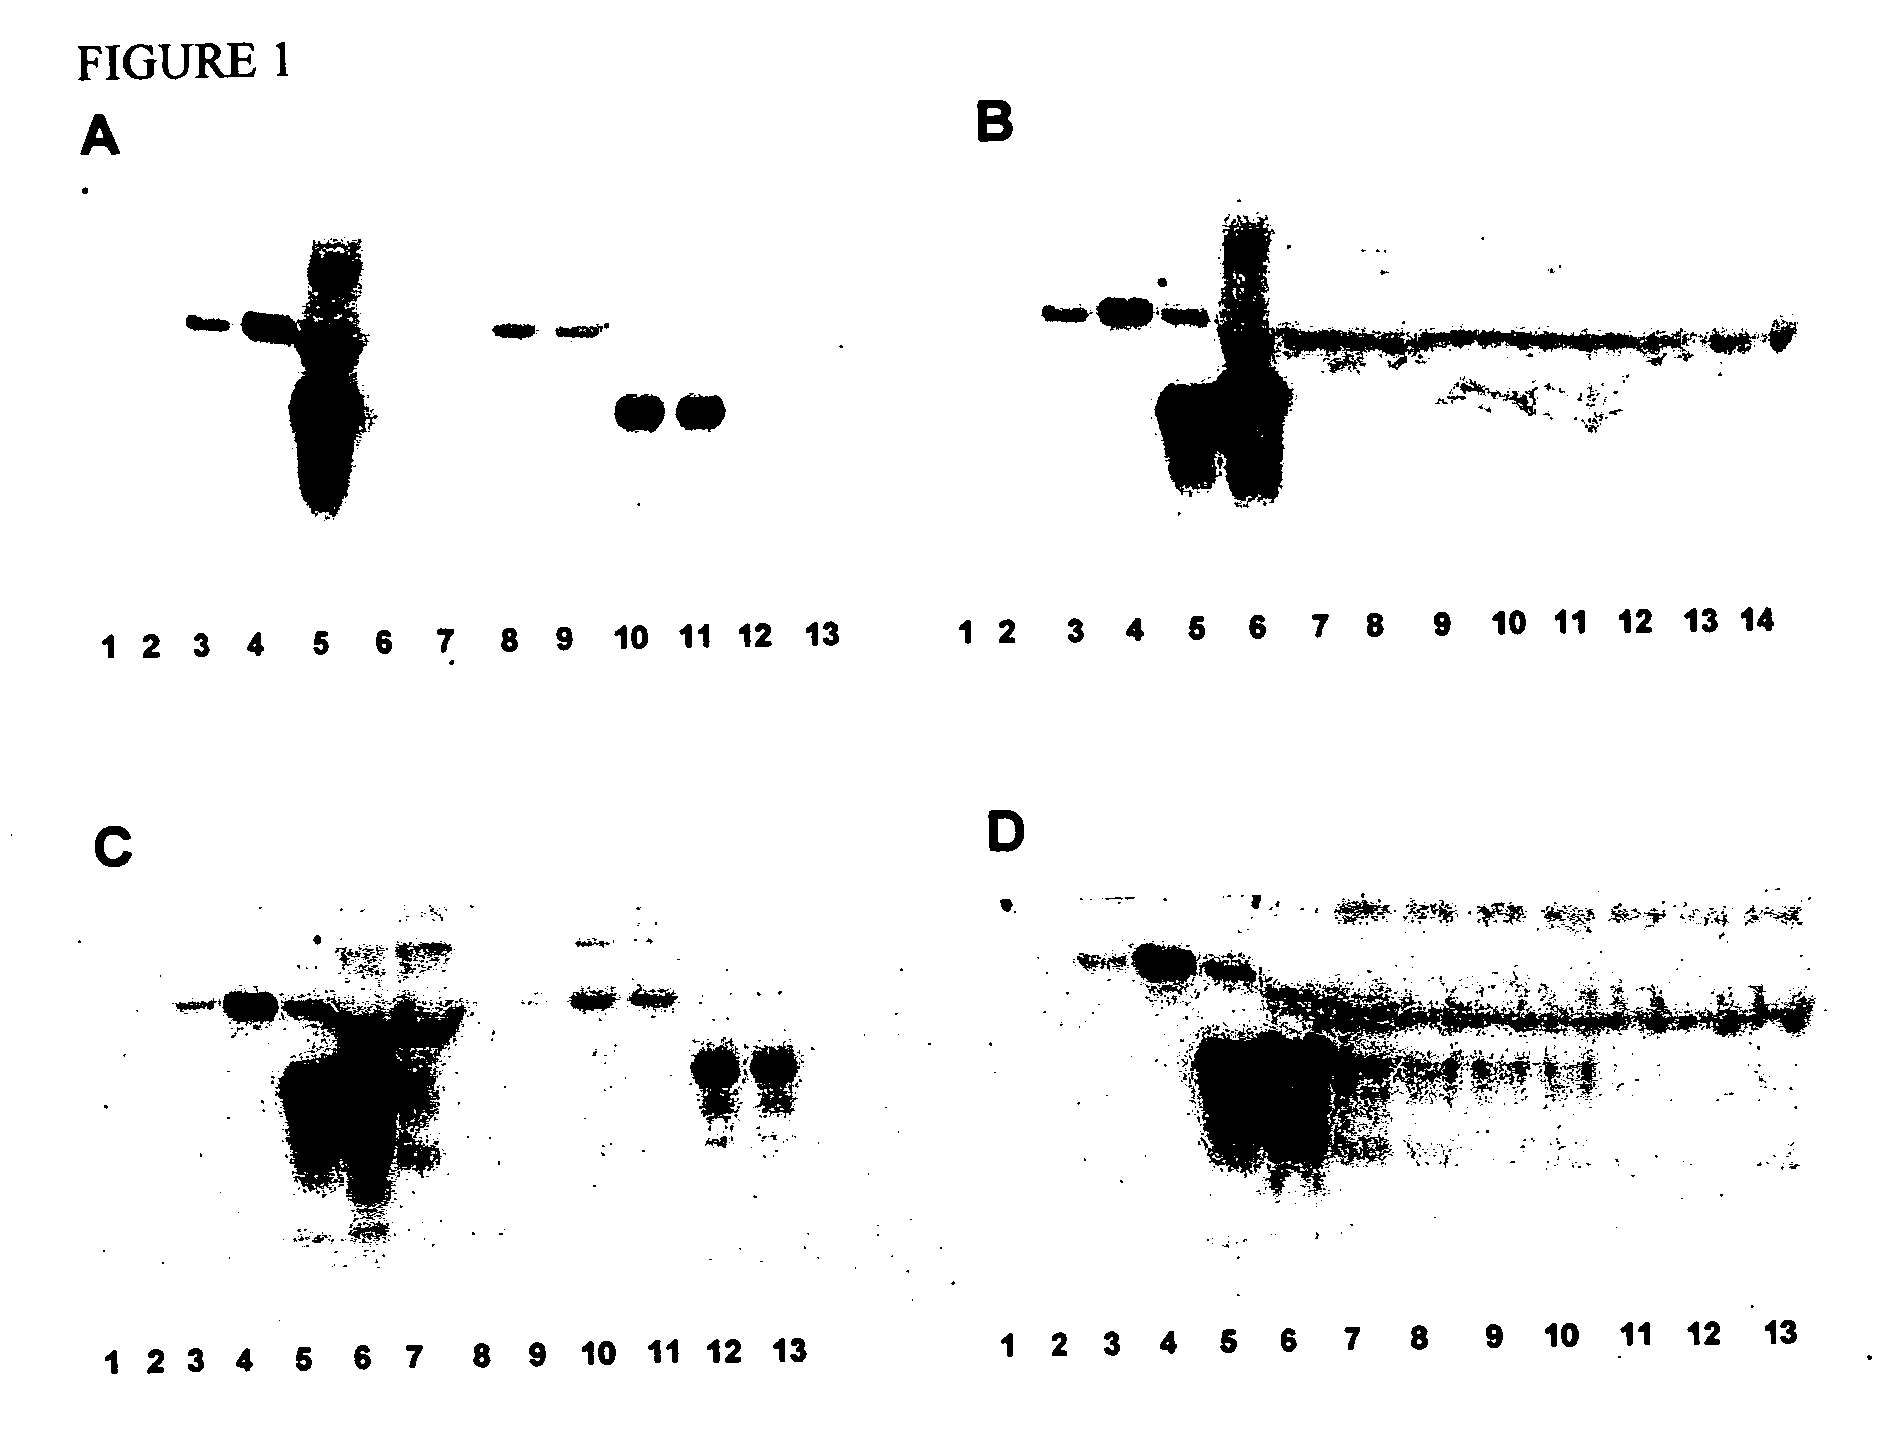 Prion protein binding materials and methods of use